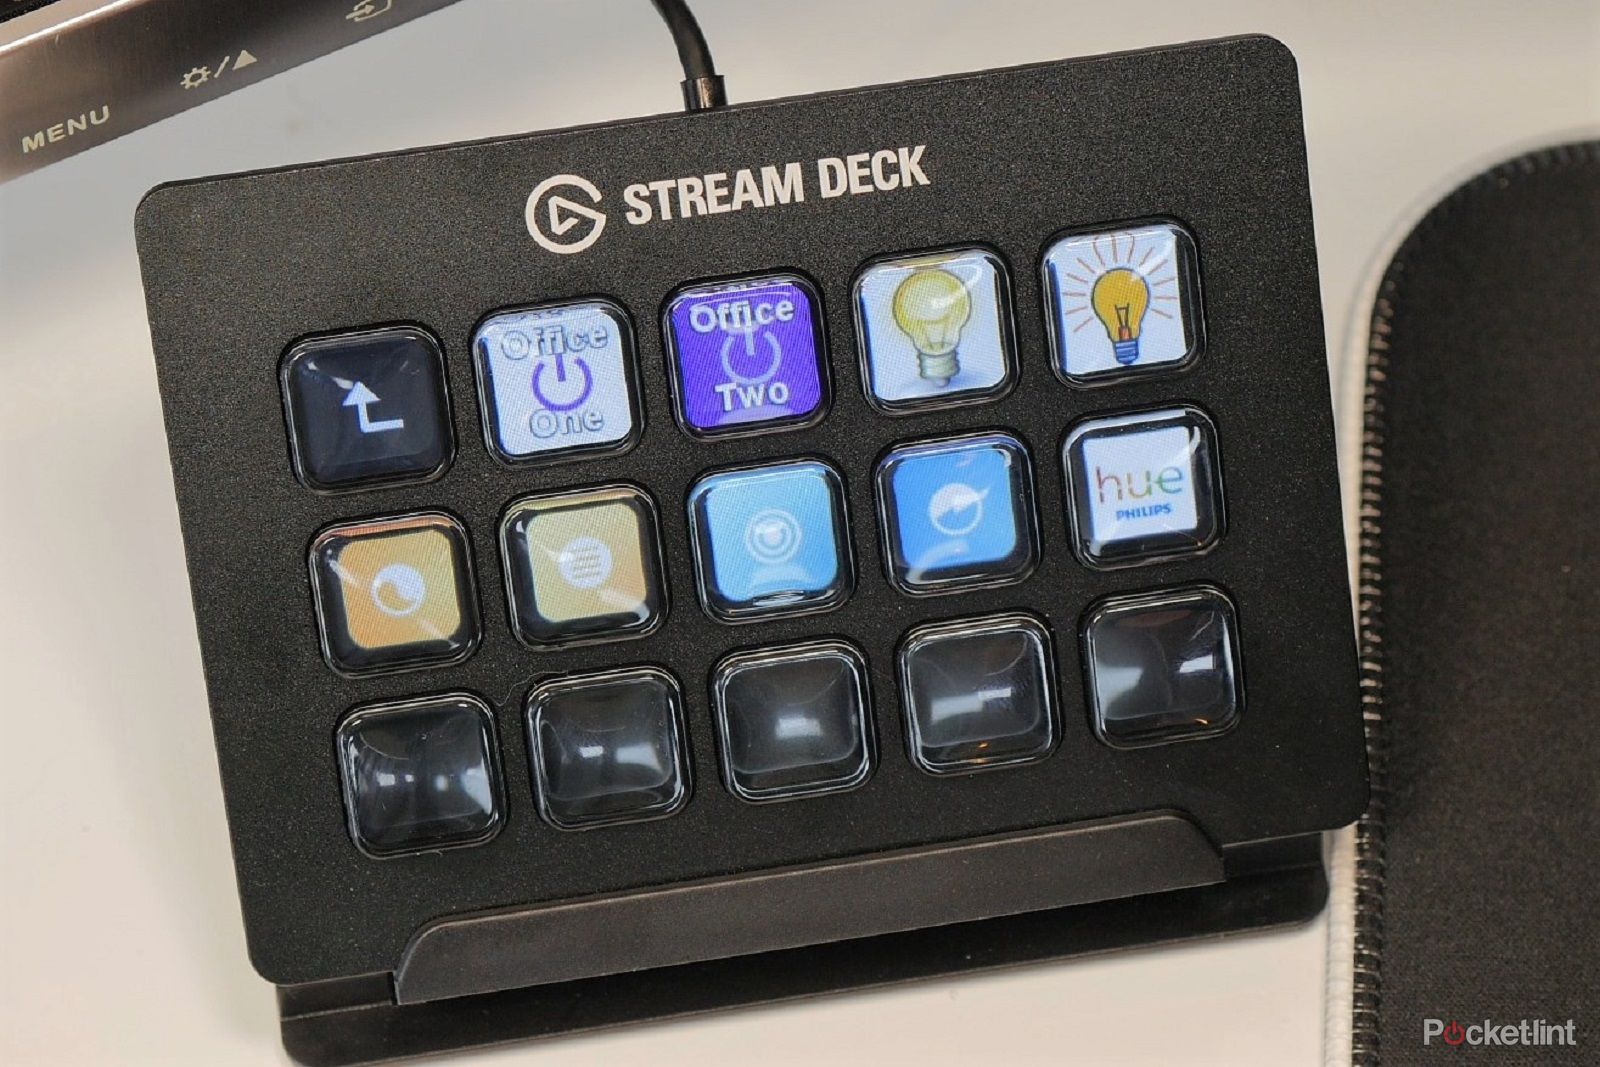 5 ways the Elgato Stream Deck can streamline your workflow (even if you're  not a streamer)